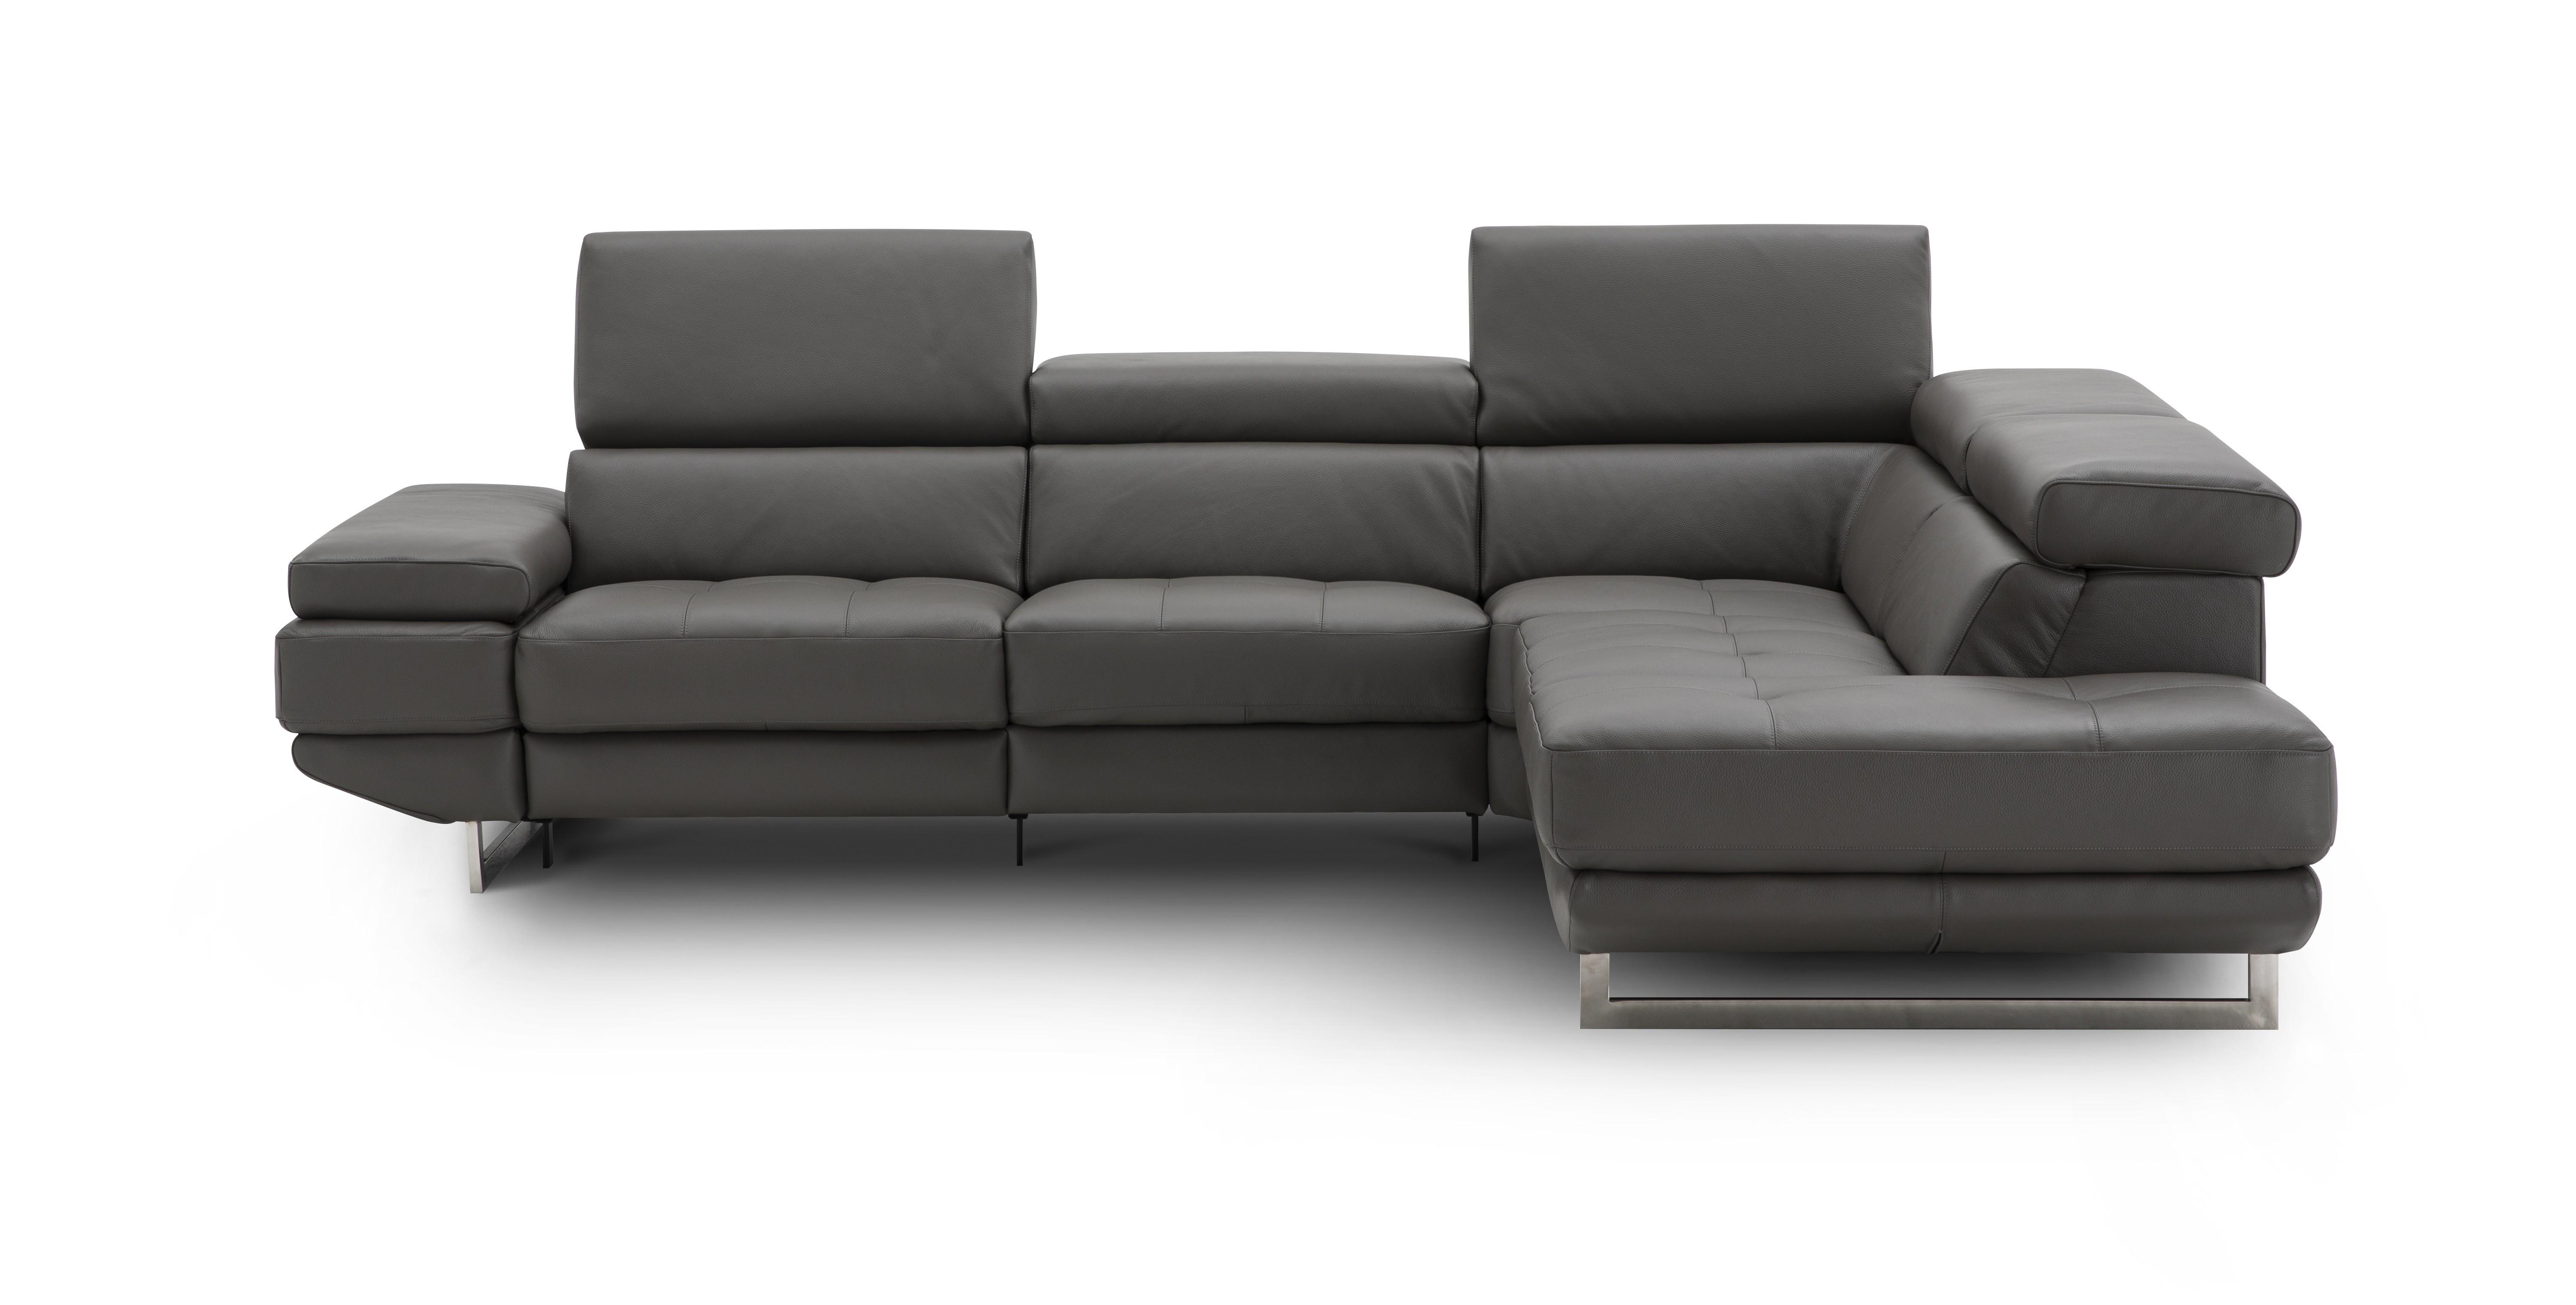 

    
Recliner Leather Sectional in Dark Grey RHF by J&M Furniture The Annalaise 19933
